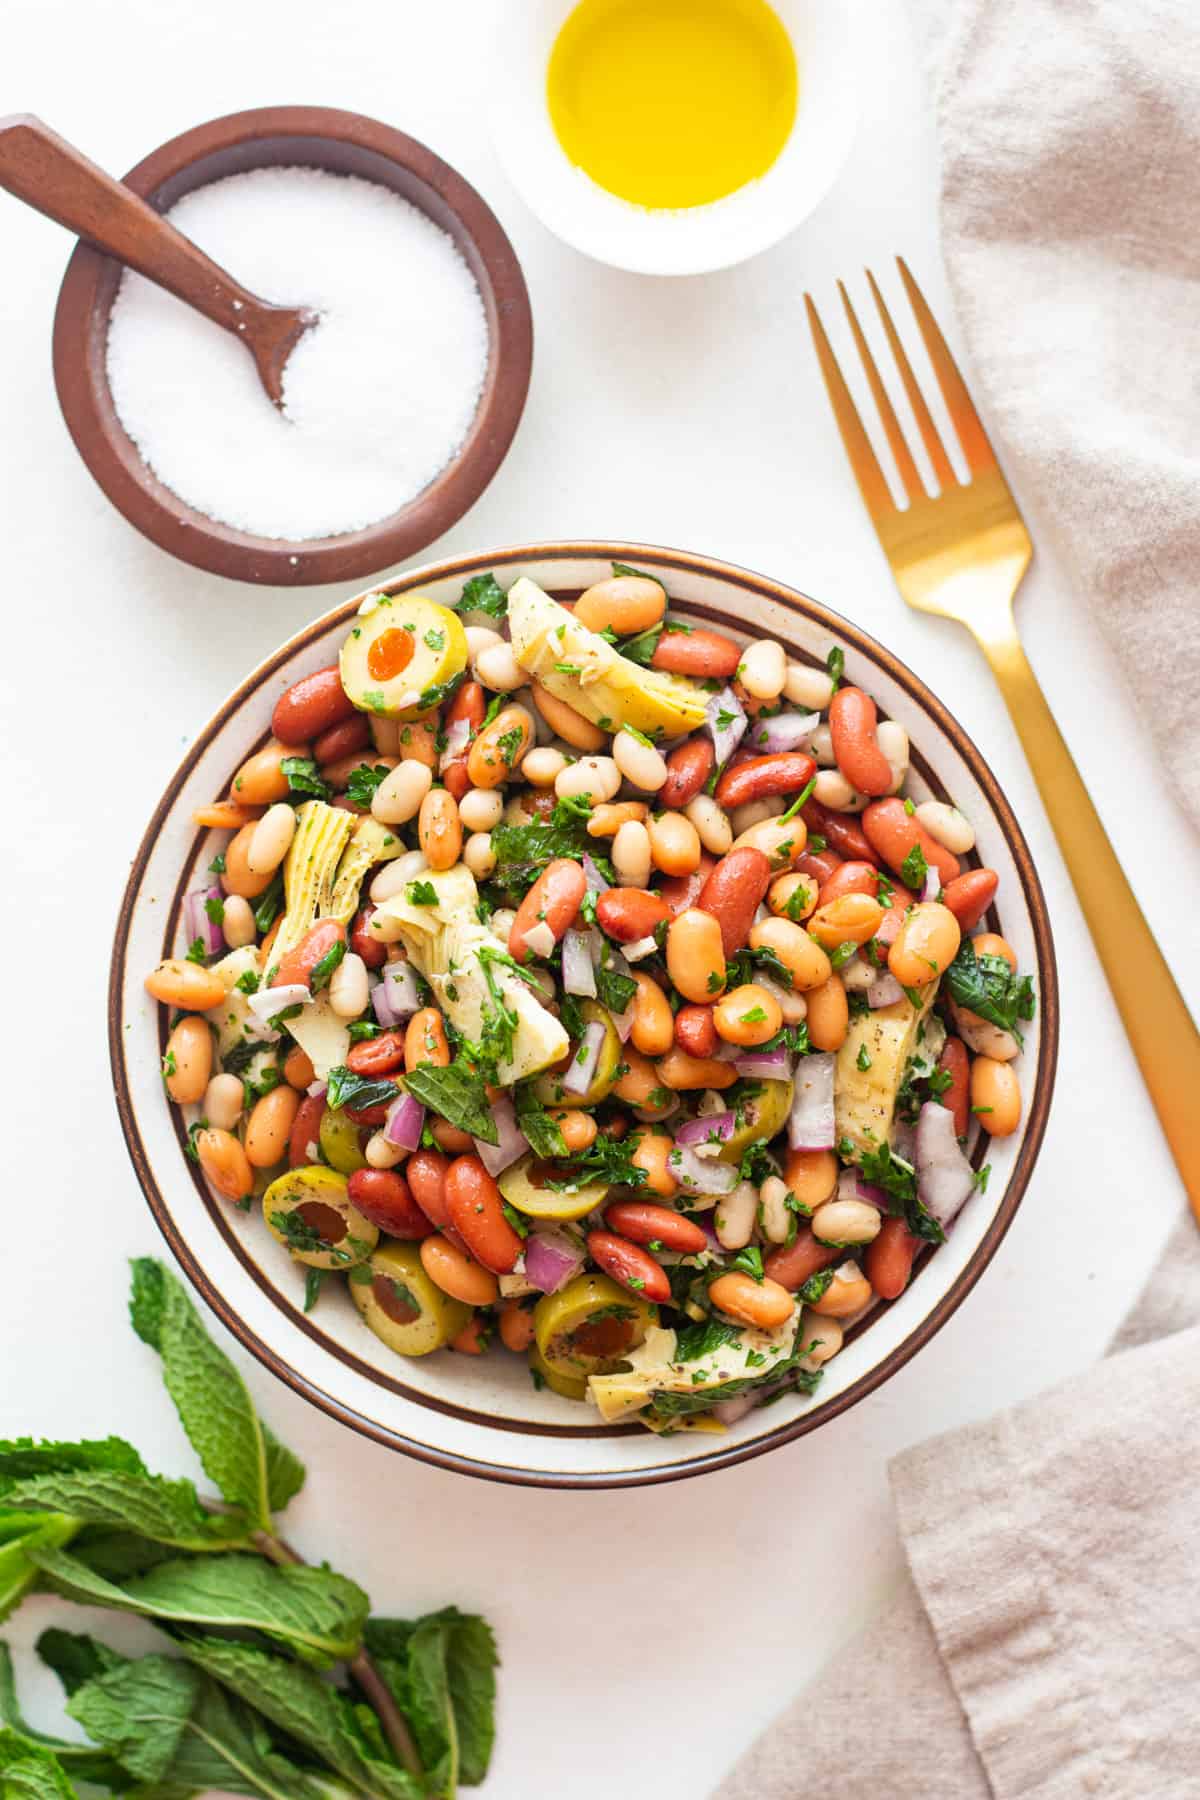 An easy three bean salad recipe with a Mediterranean twist. This protein-packed vegan salad is perfect for meal prep or as a side dish. Make sure to watch the video for step-by-step instructions. 